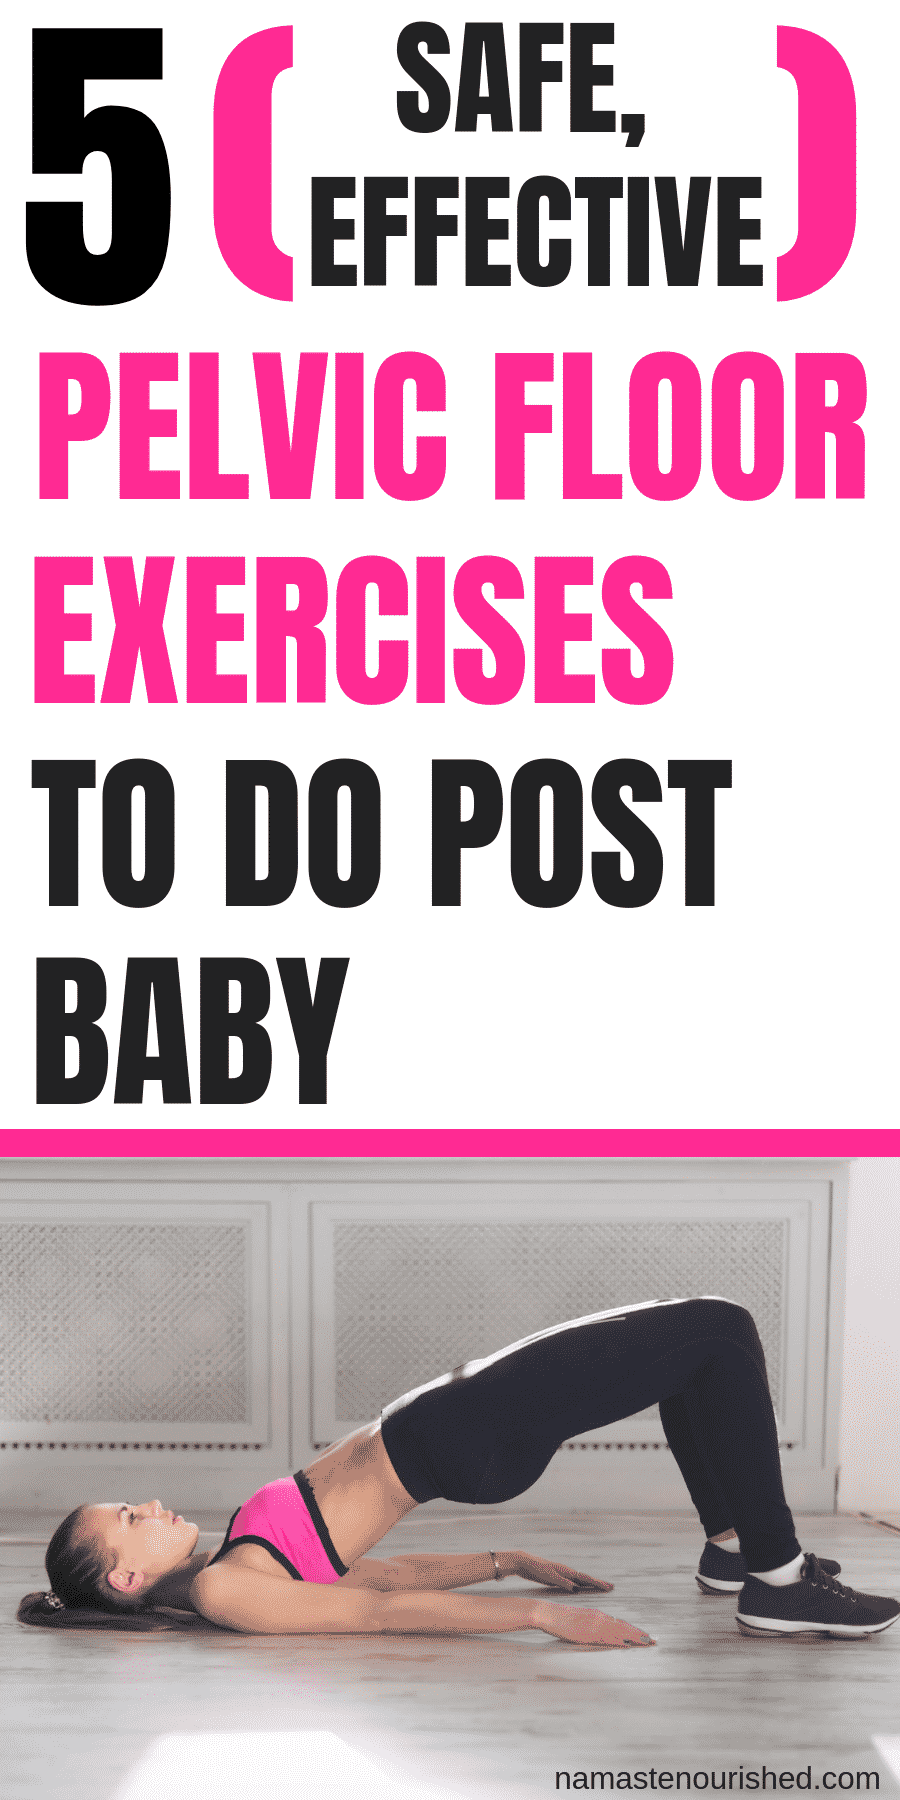 5 pelvic floor exercises to do post baby that are safe, effective and will help to strengthen the pelvic floor and reduce urinary incontinence